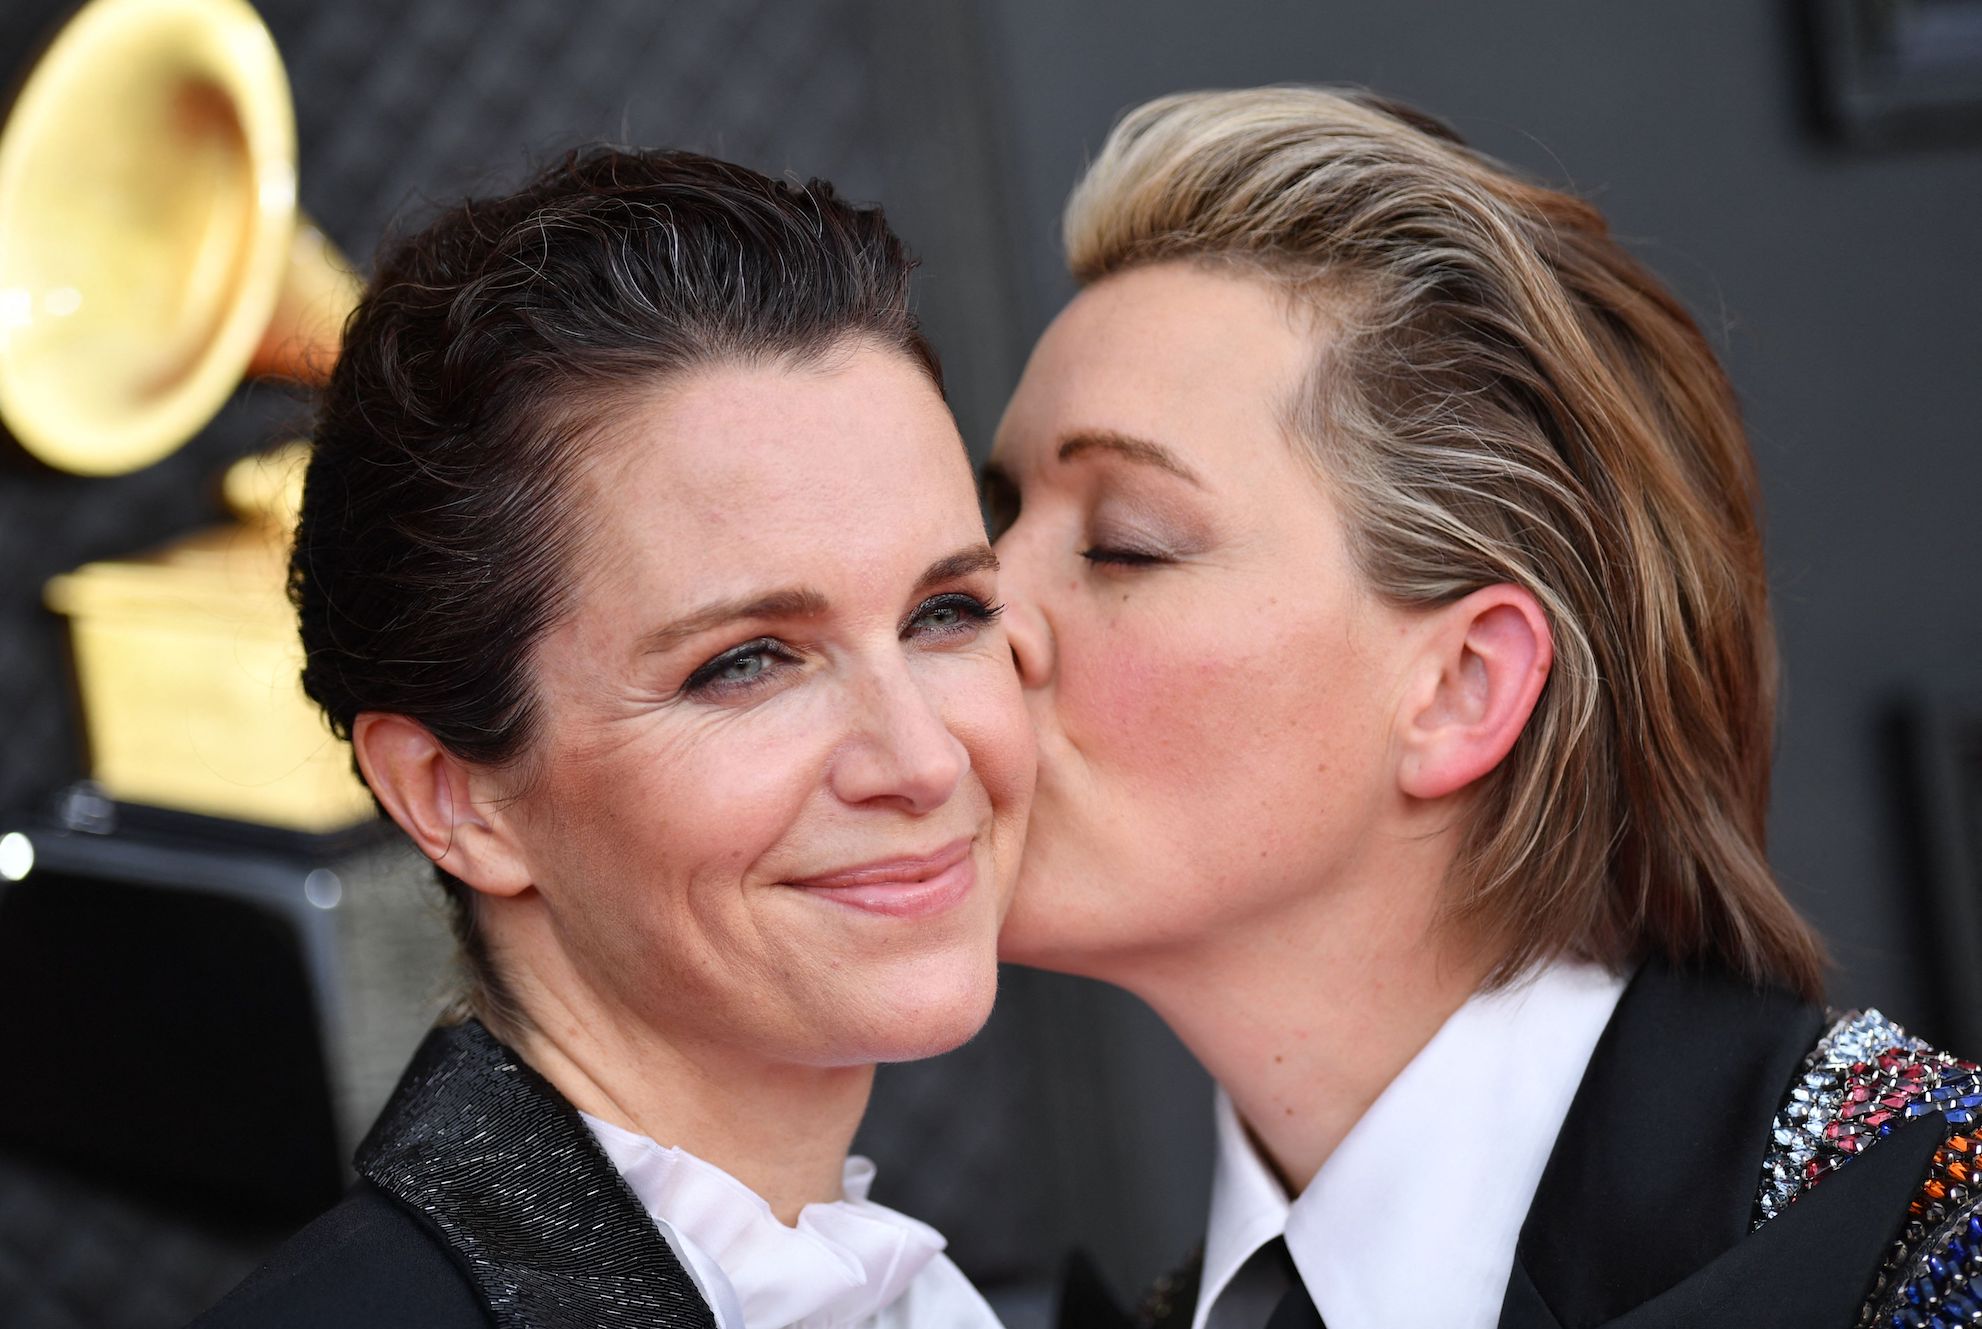 Brandi Carlile and wife Catherine Shepherd on the red carpet at the Grammys 2022